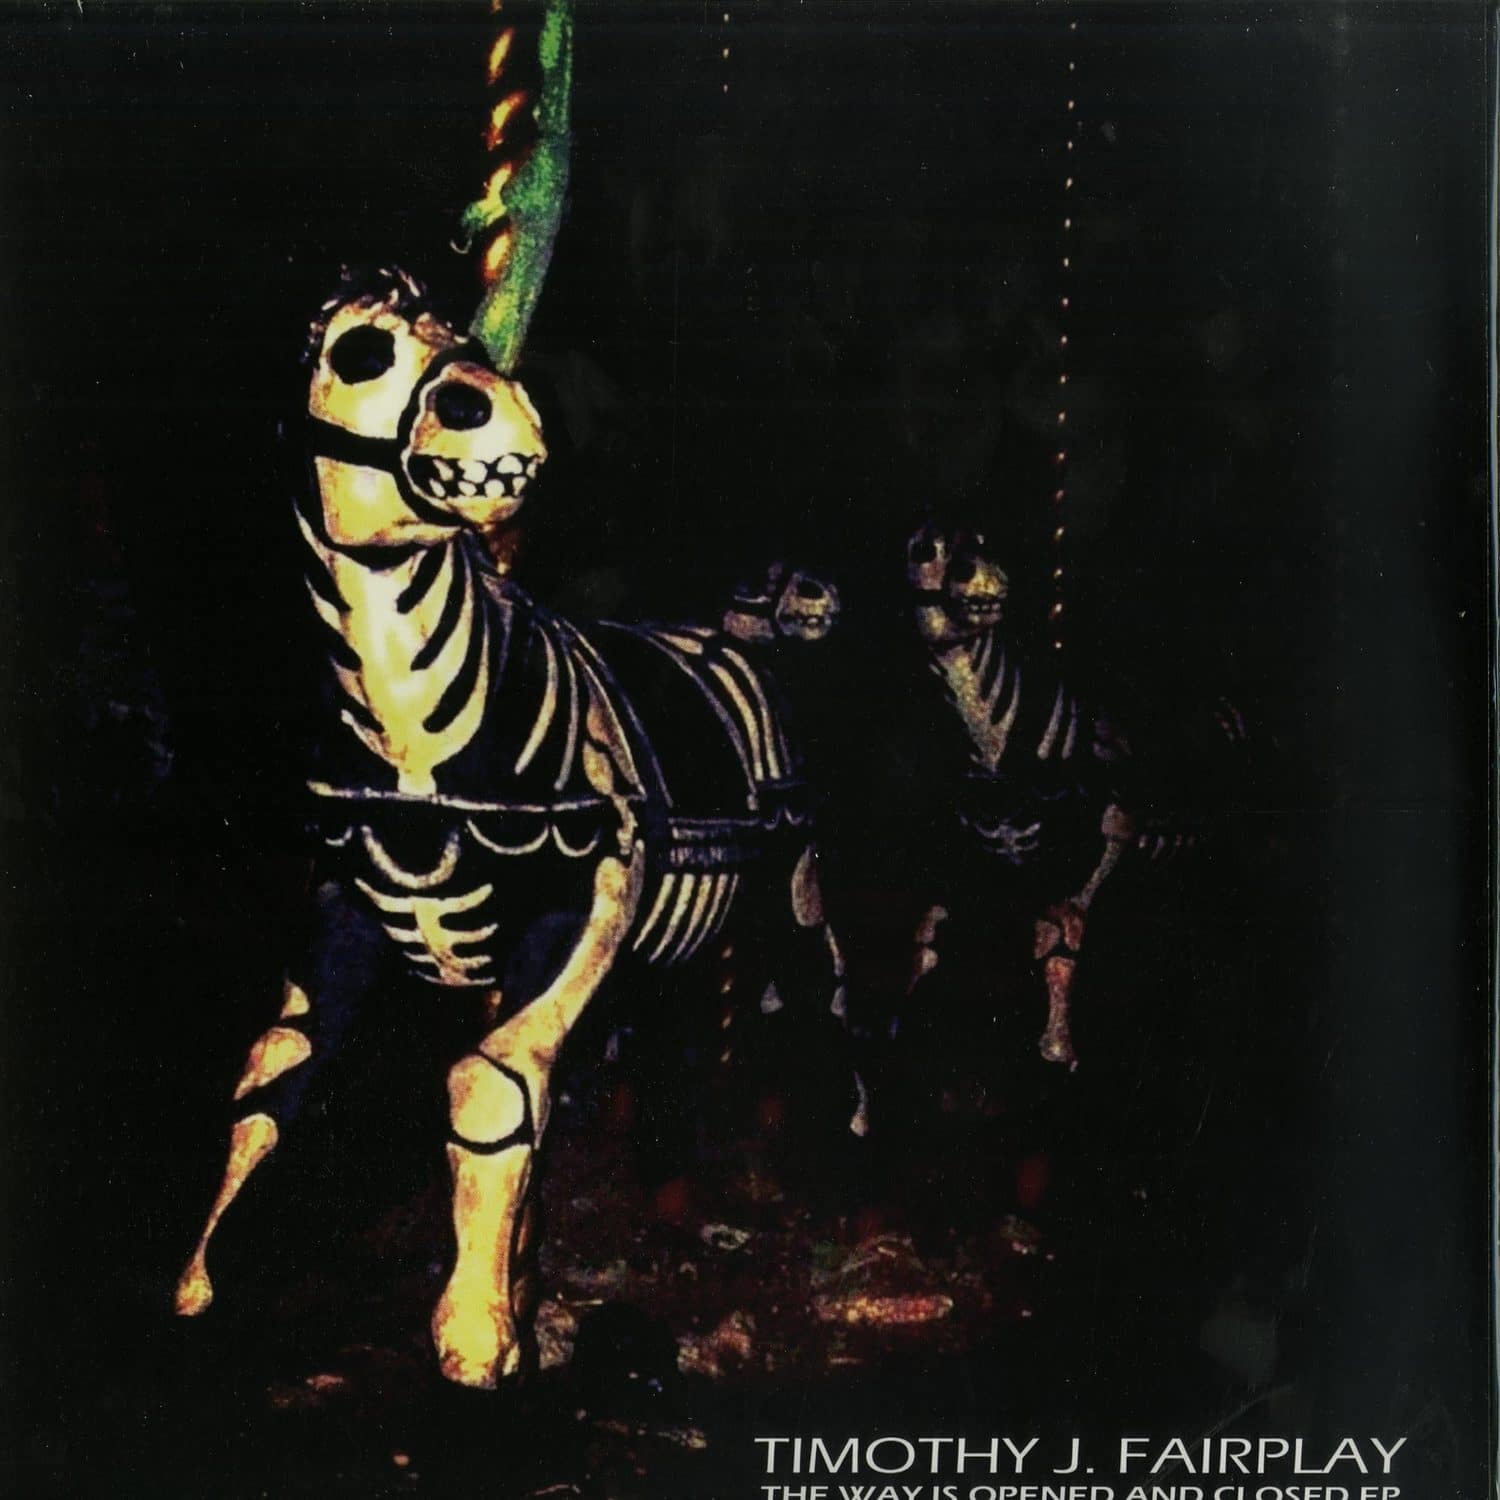 Timothy J. Fairplay - THE WAY IS OPENED AND CLOSED EP